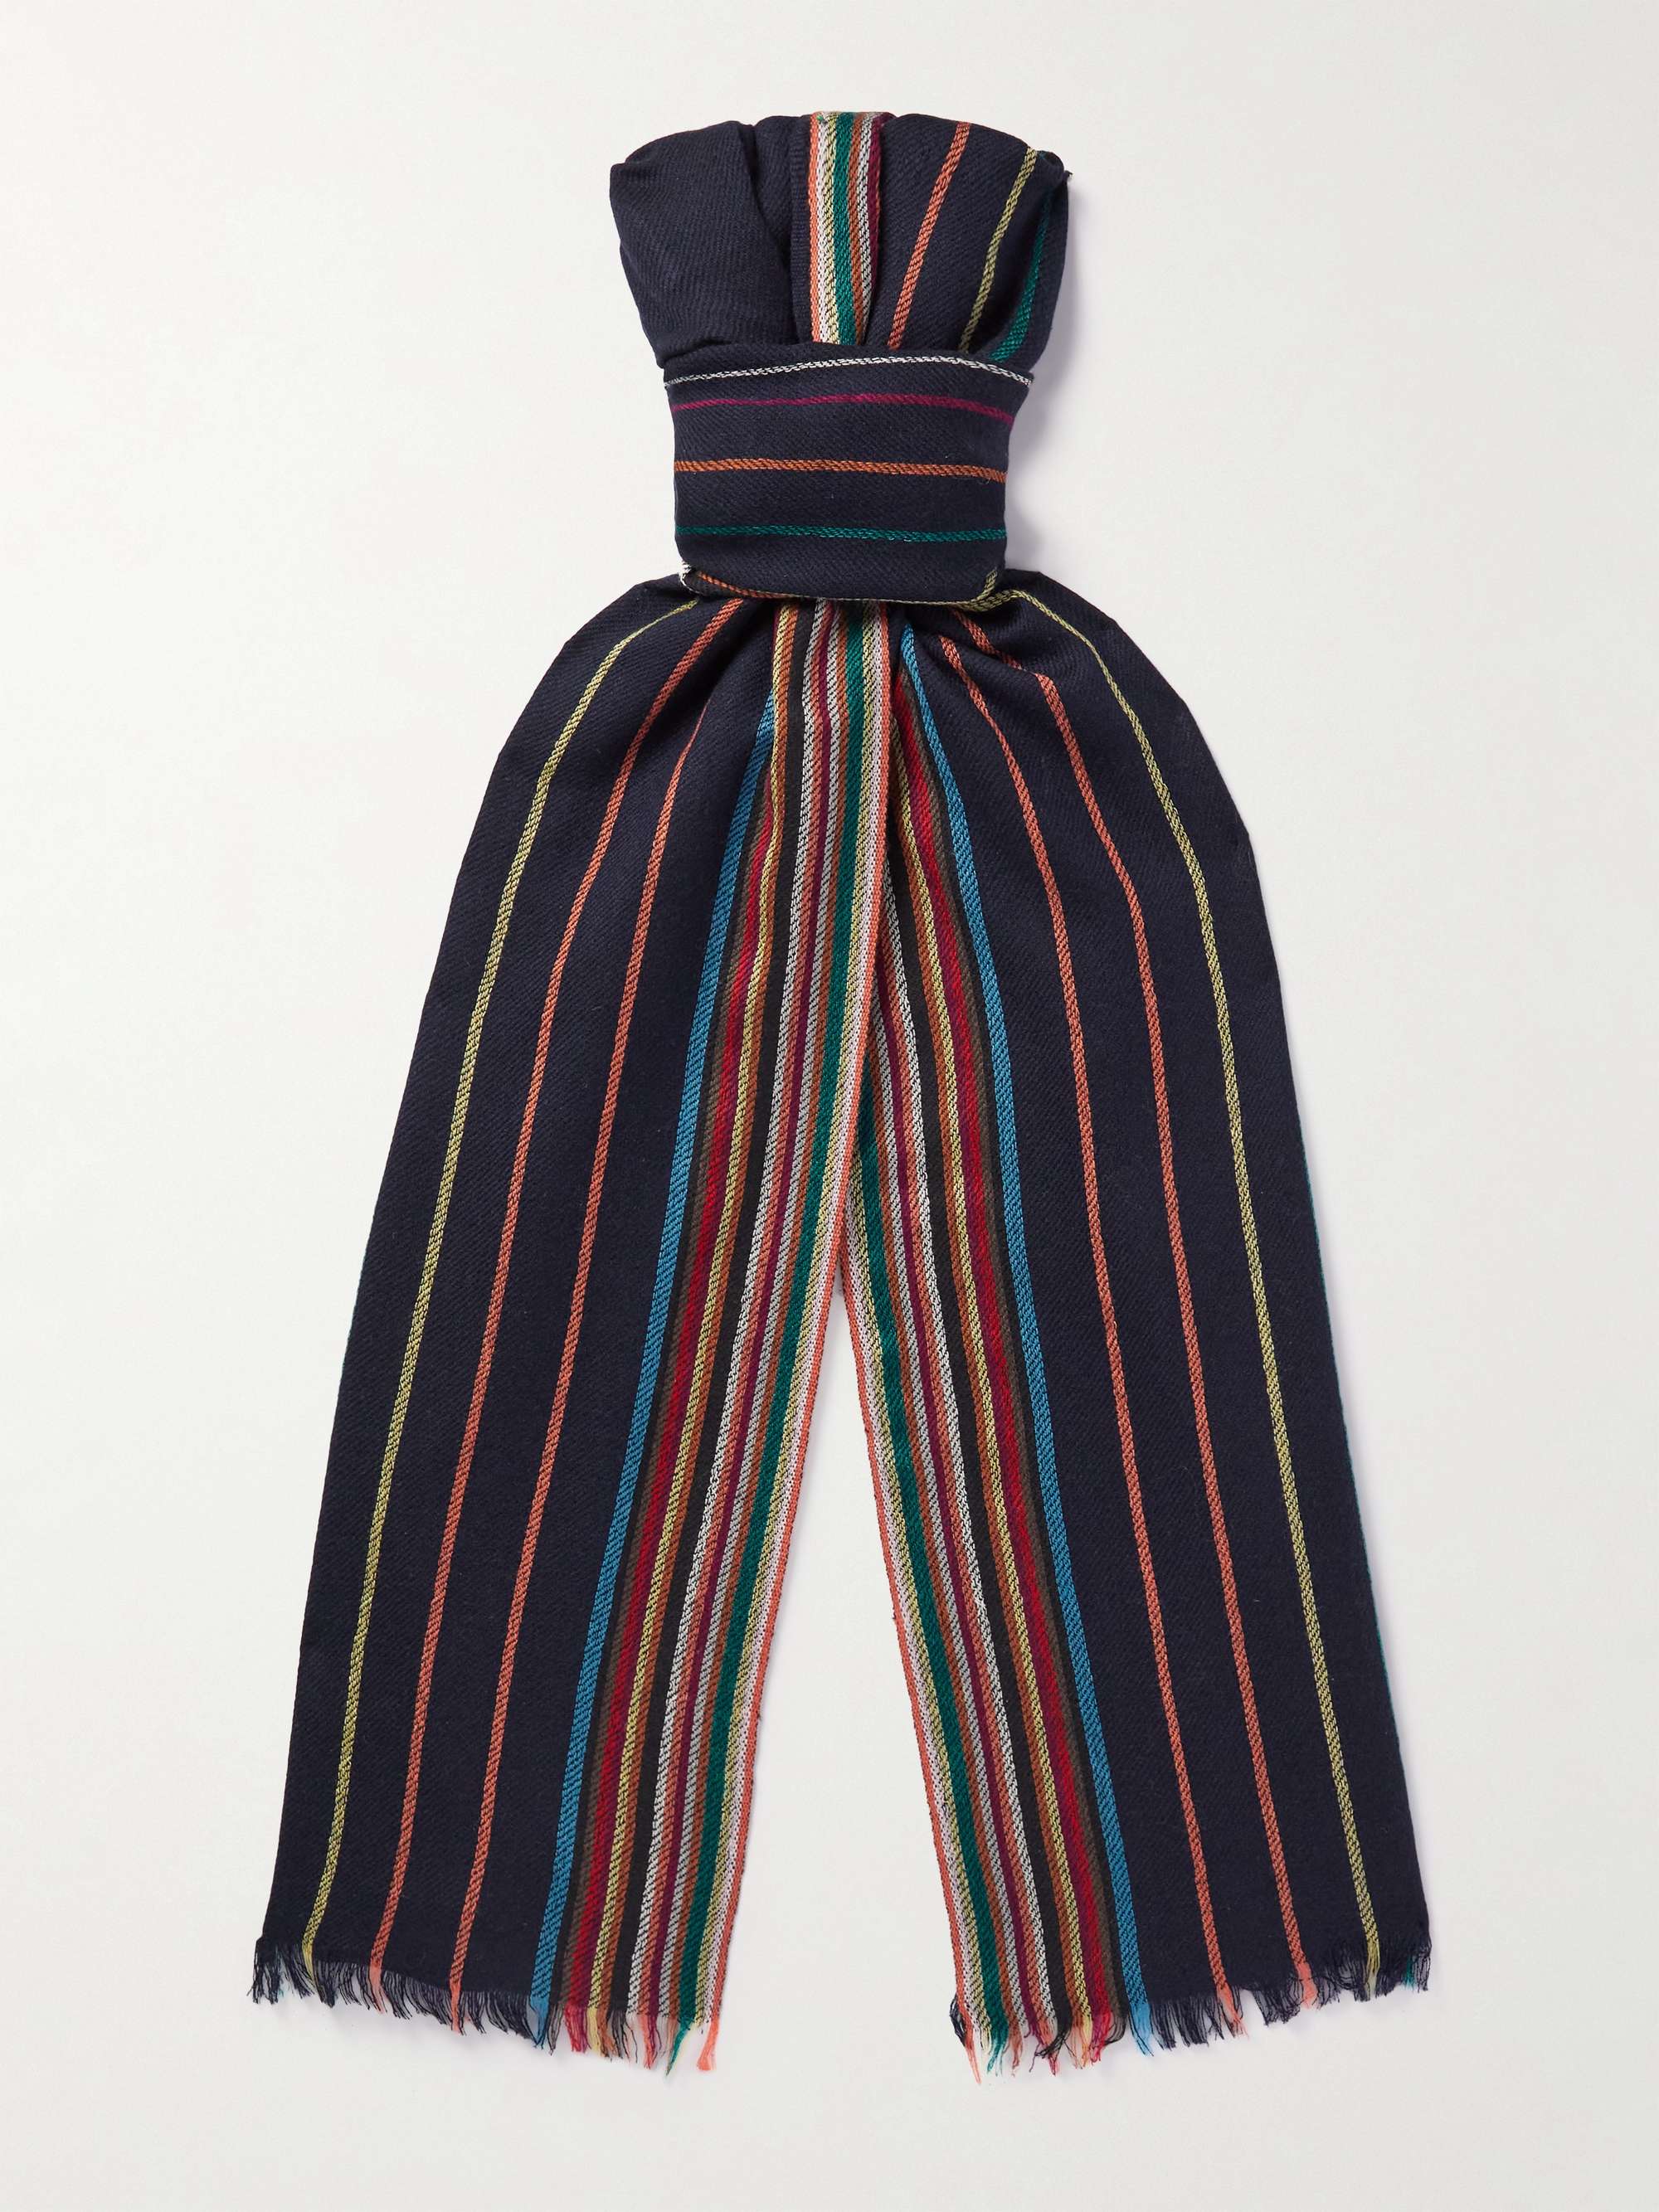 PAUL SMITH Striped Wool and Silk-Blend Scarf | MR PORTER